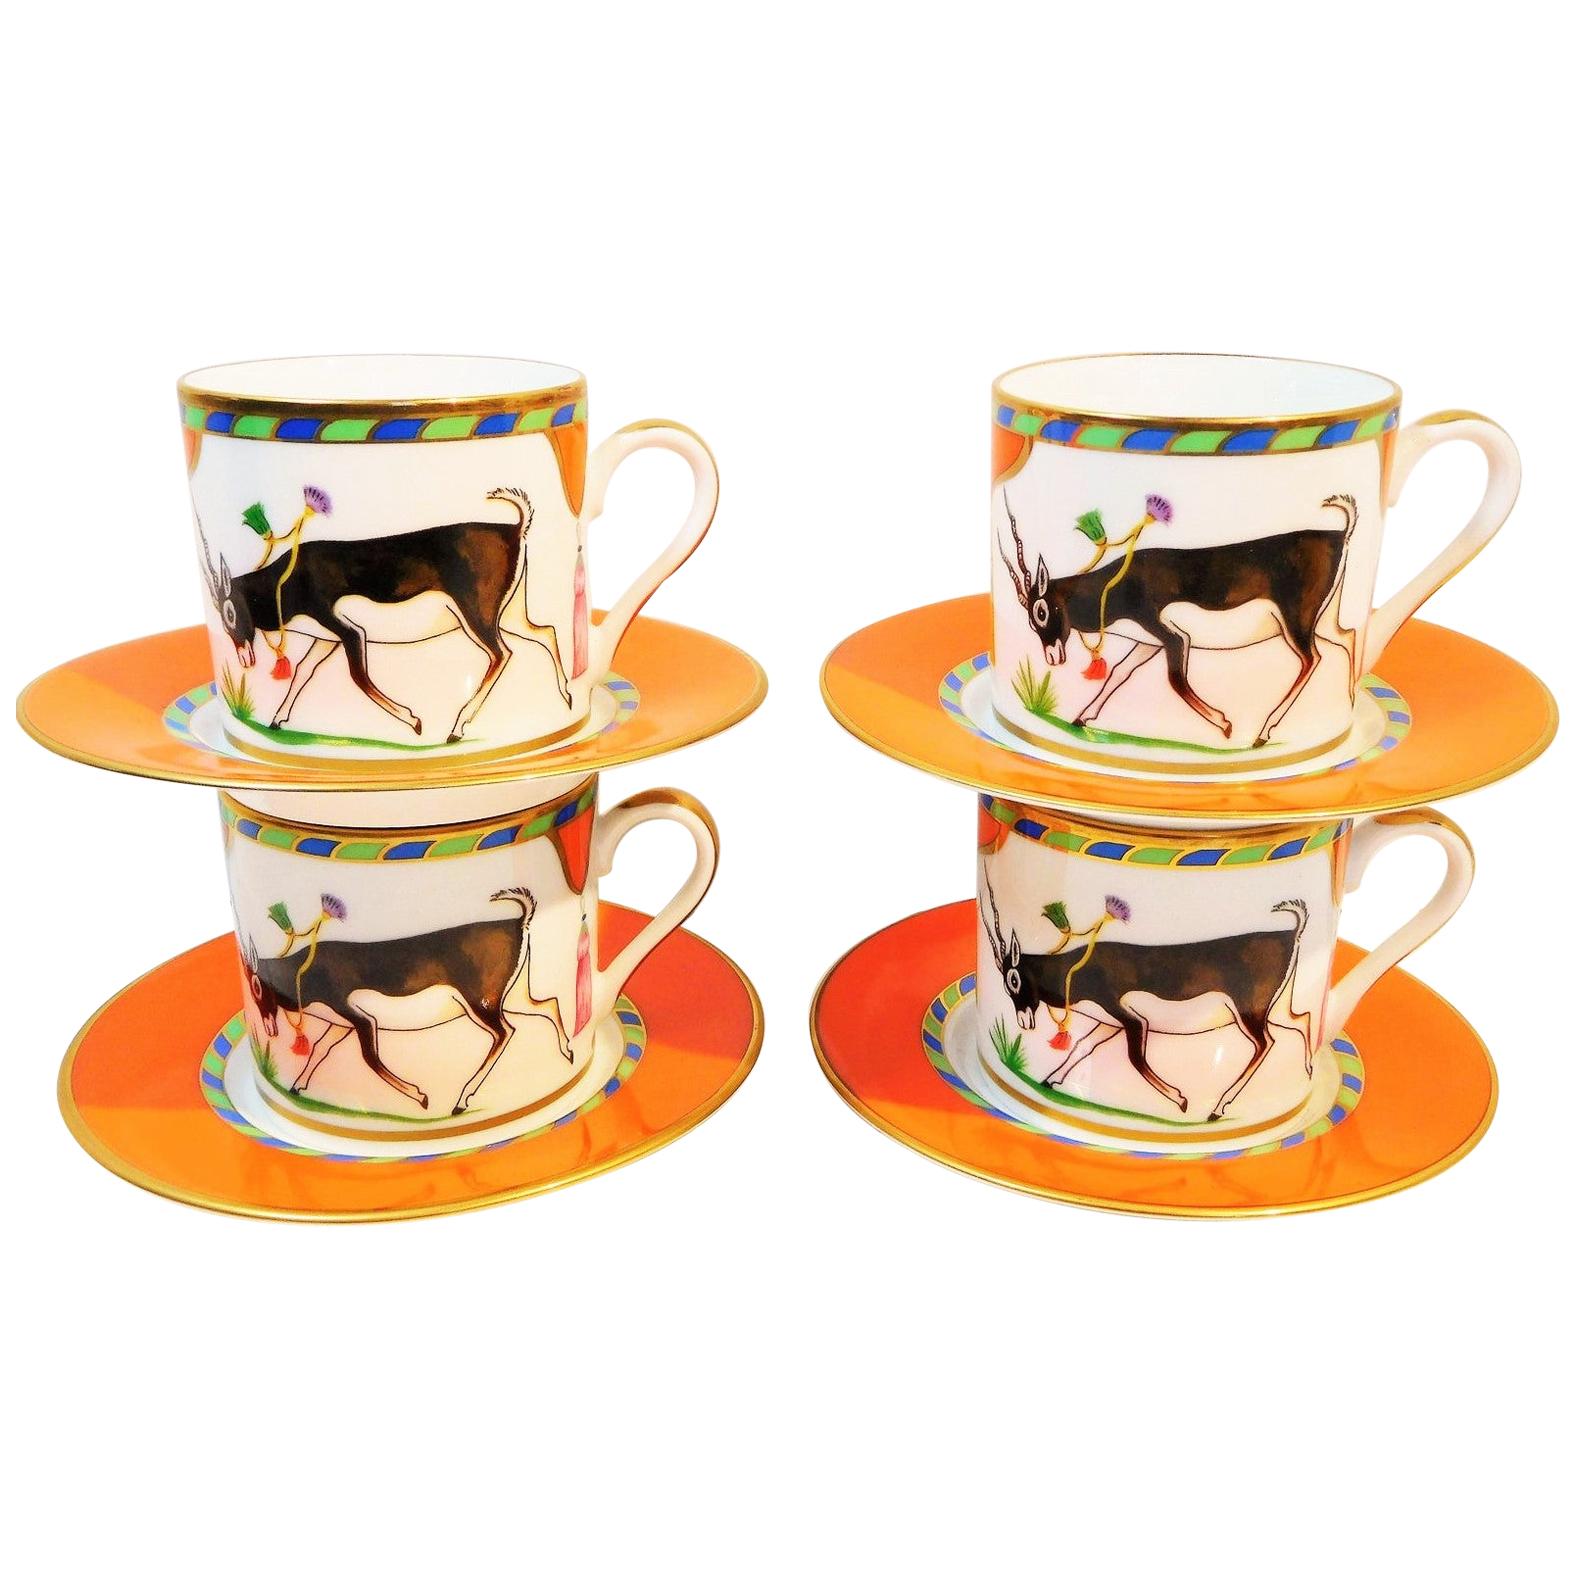 Lynn Chase "Tiger Raj" Porcelain Demitasse Cups and Saucers with 24k Gold Trim